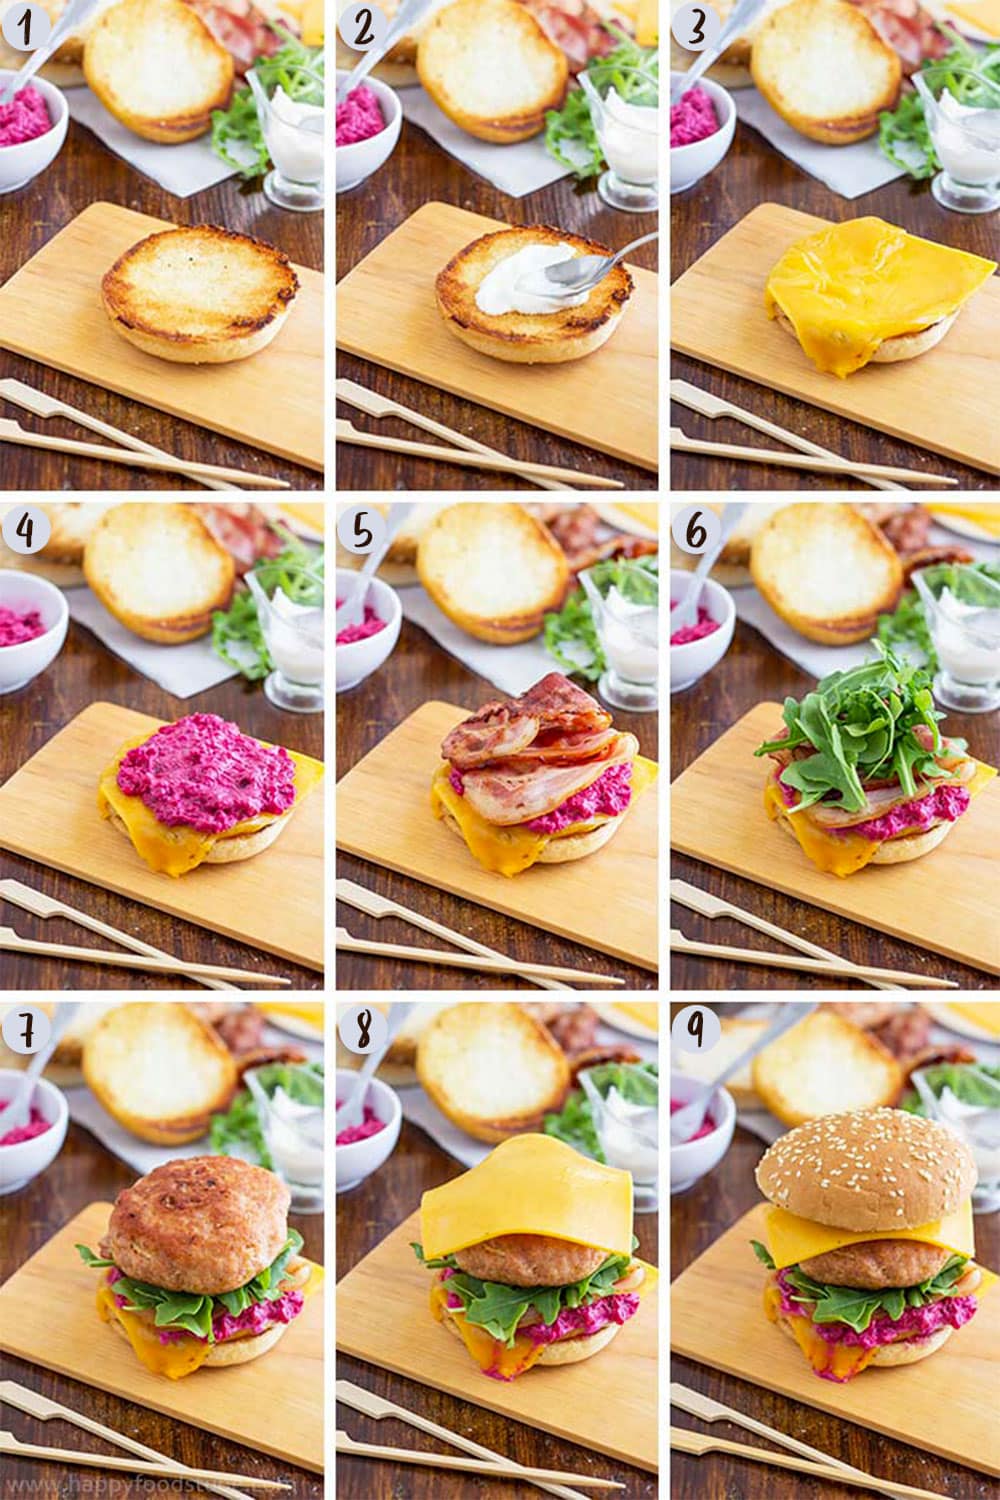 Step by step pictures how to assemble ground chicken burgers.